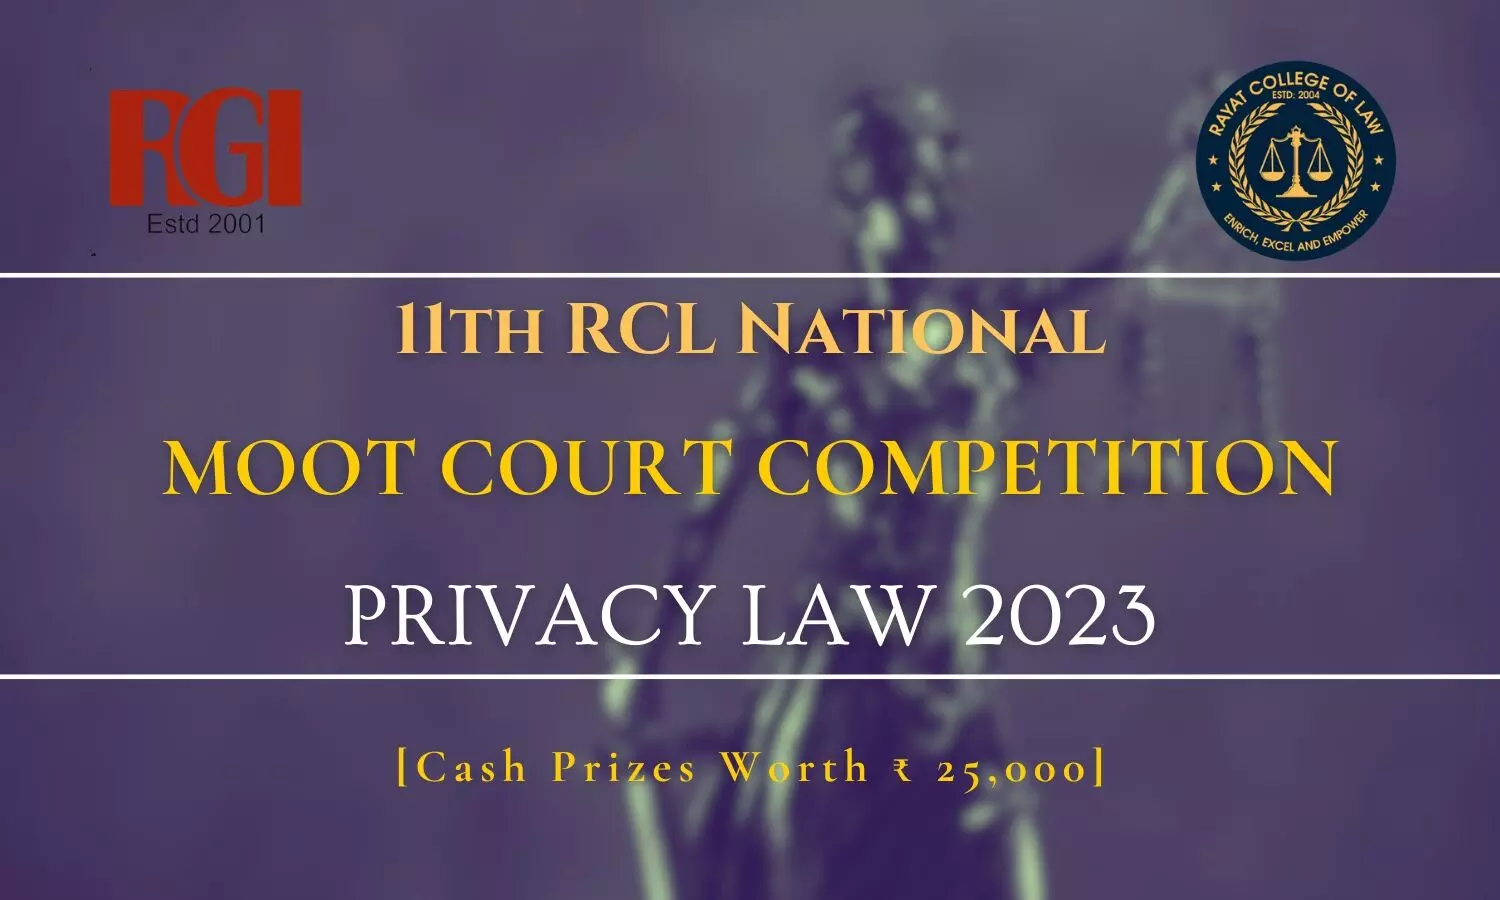 11th RCL National Moot Court Competition on Privacy Law 2023  Rayat College of Law, Punjab